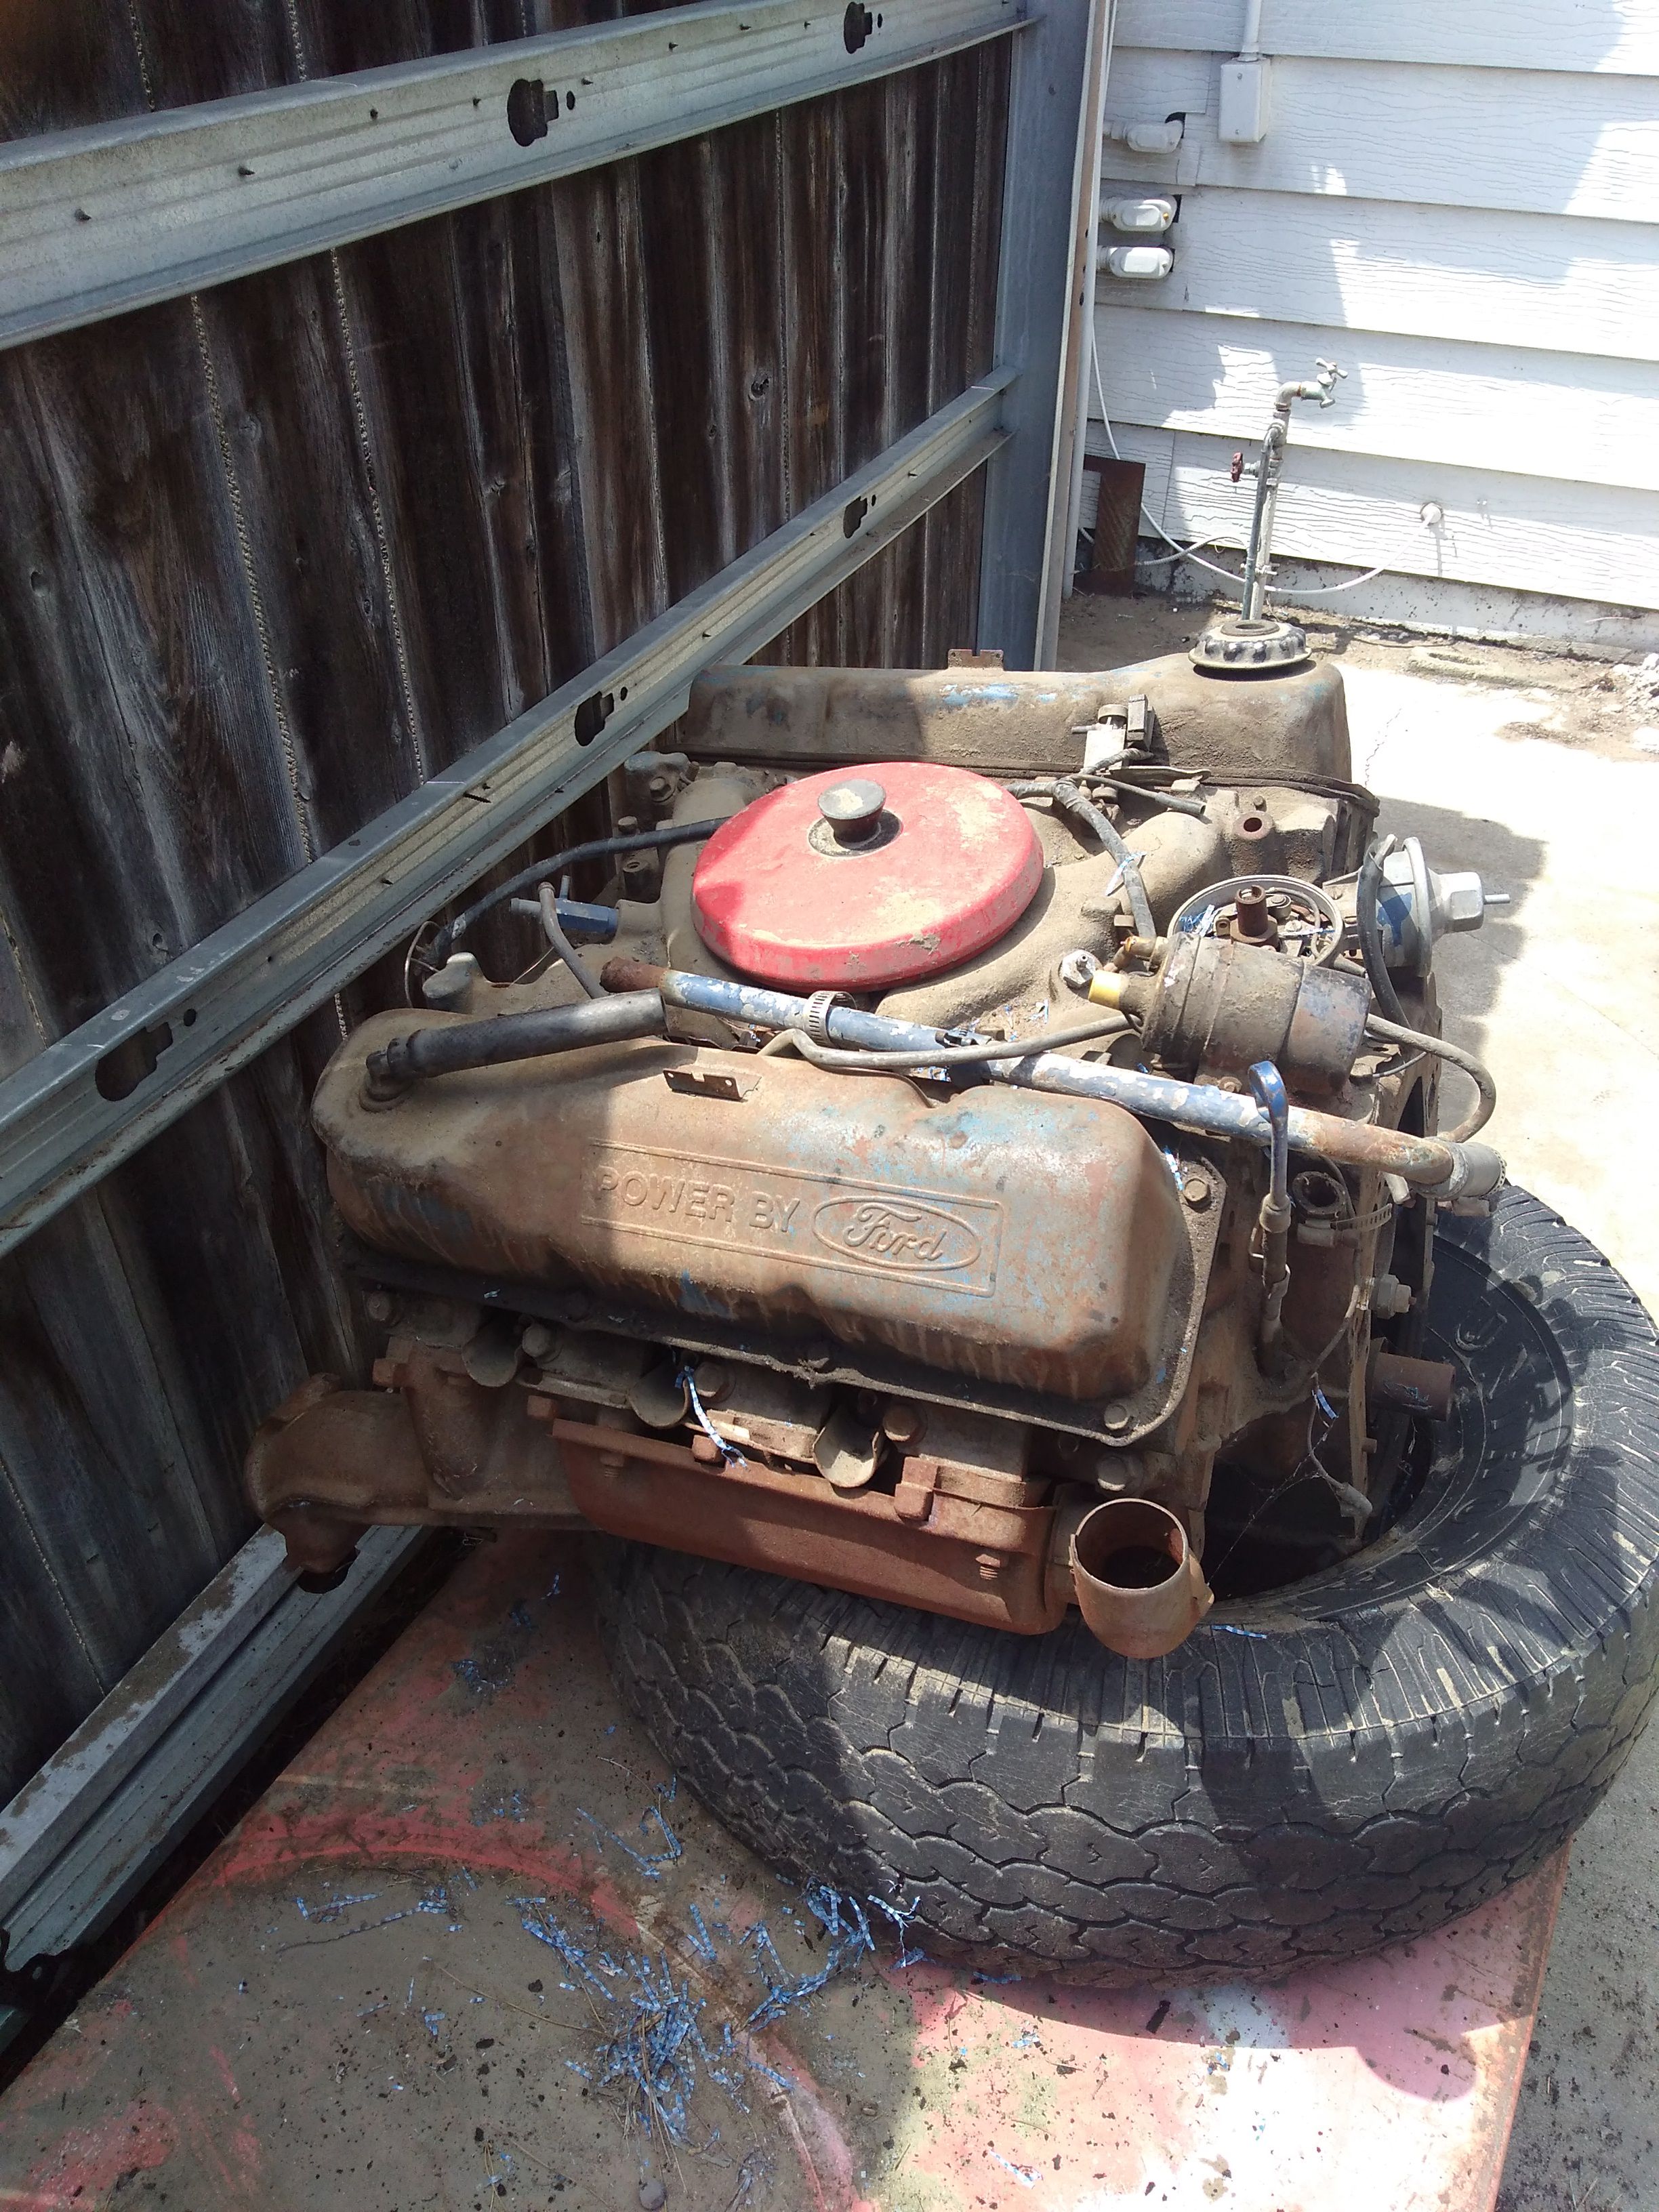 1970s Ford 400 small block engine. Engine is rebuildable